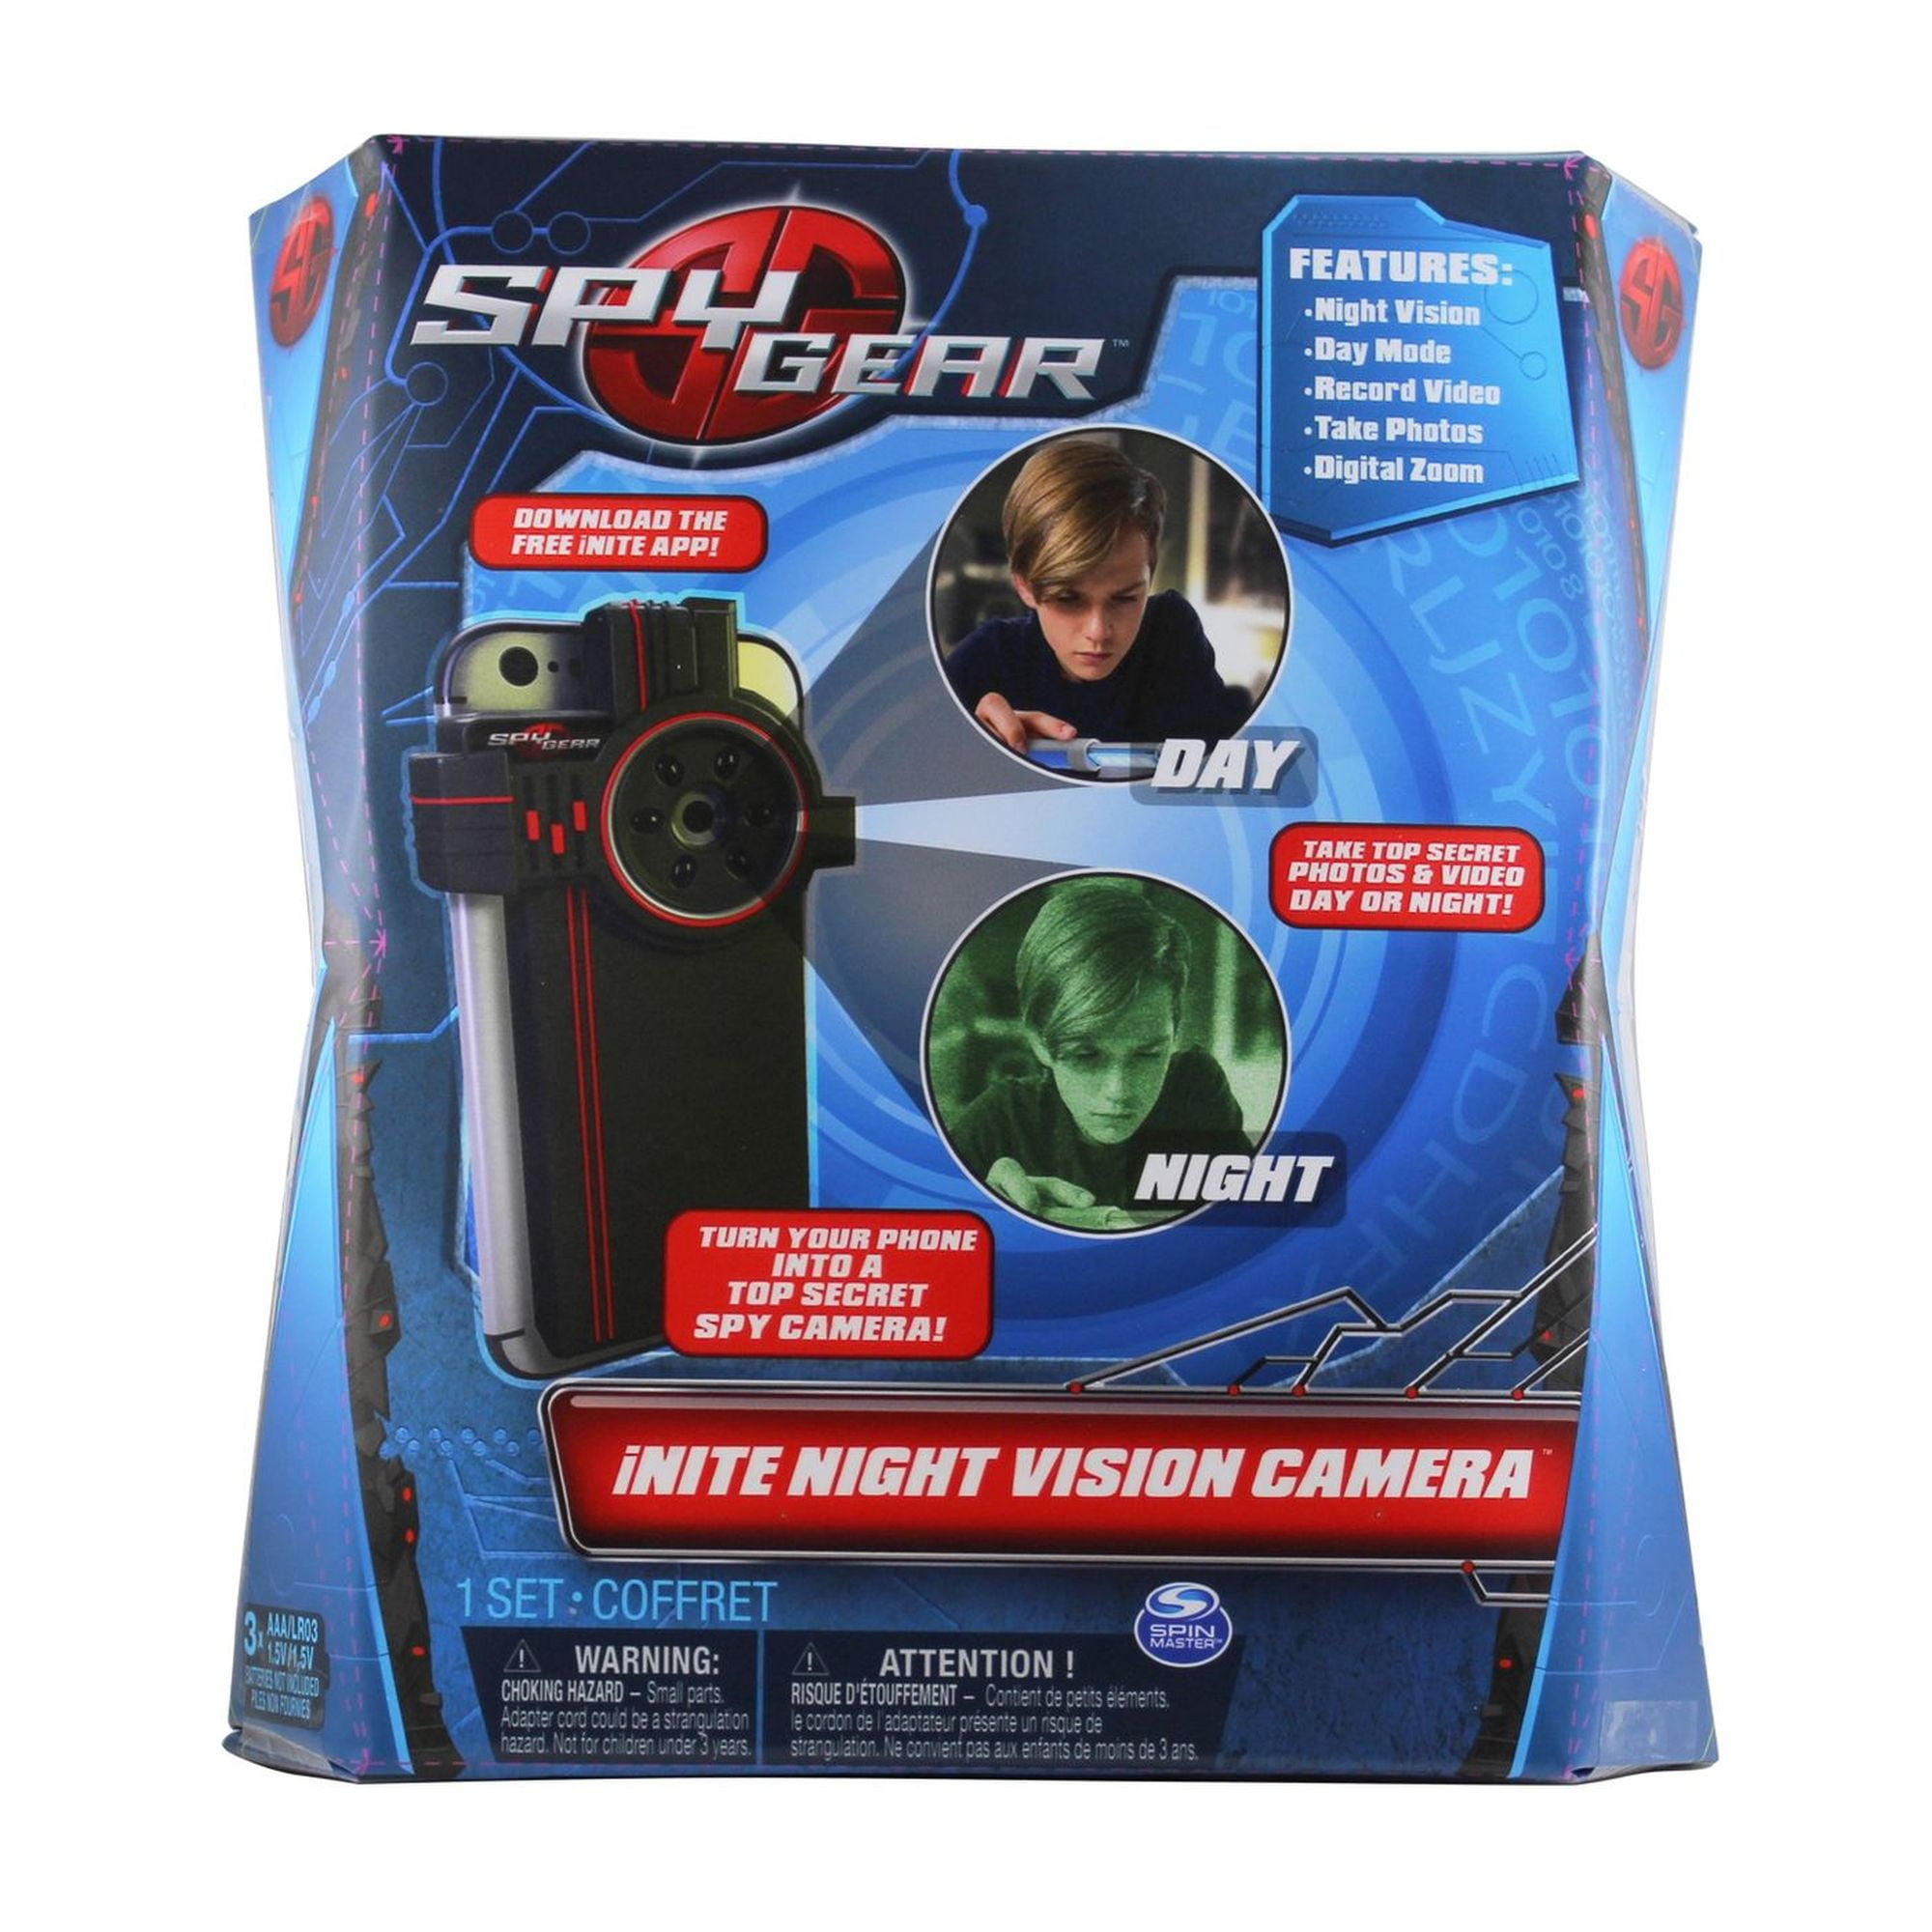 Spy Go Action Camera for sale online 6028962 Spy Gear 